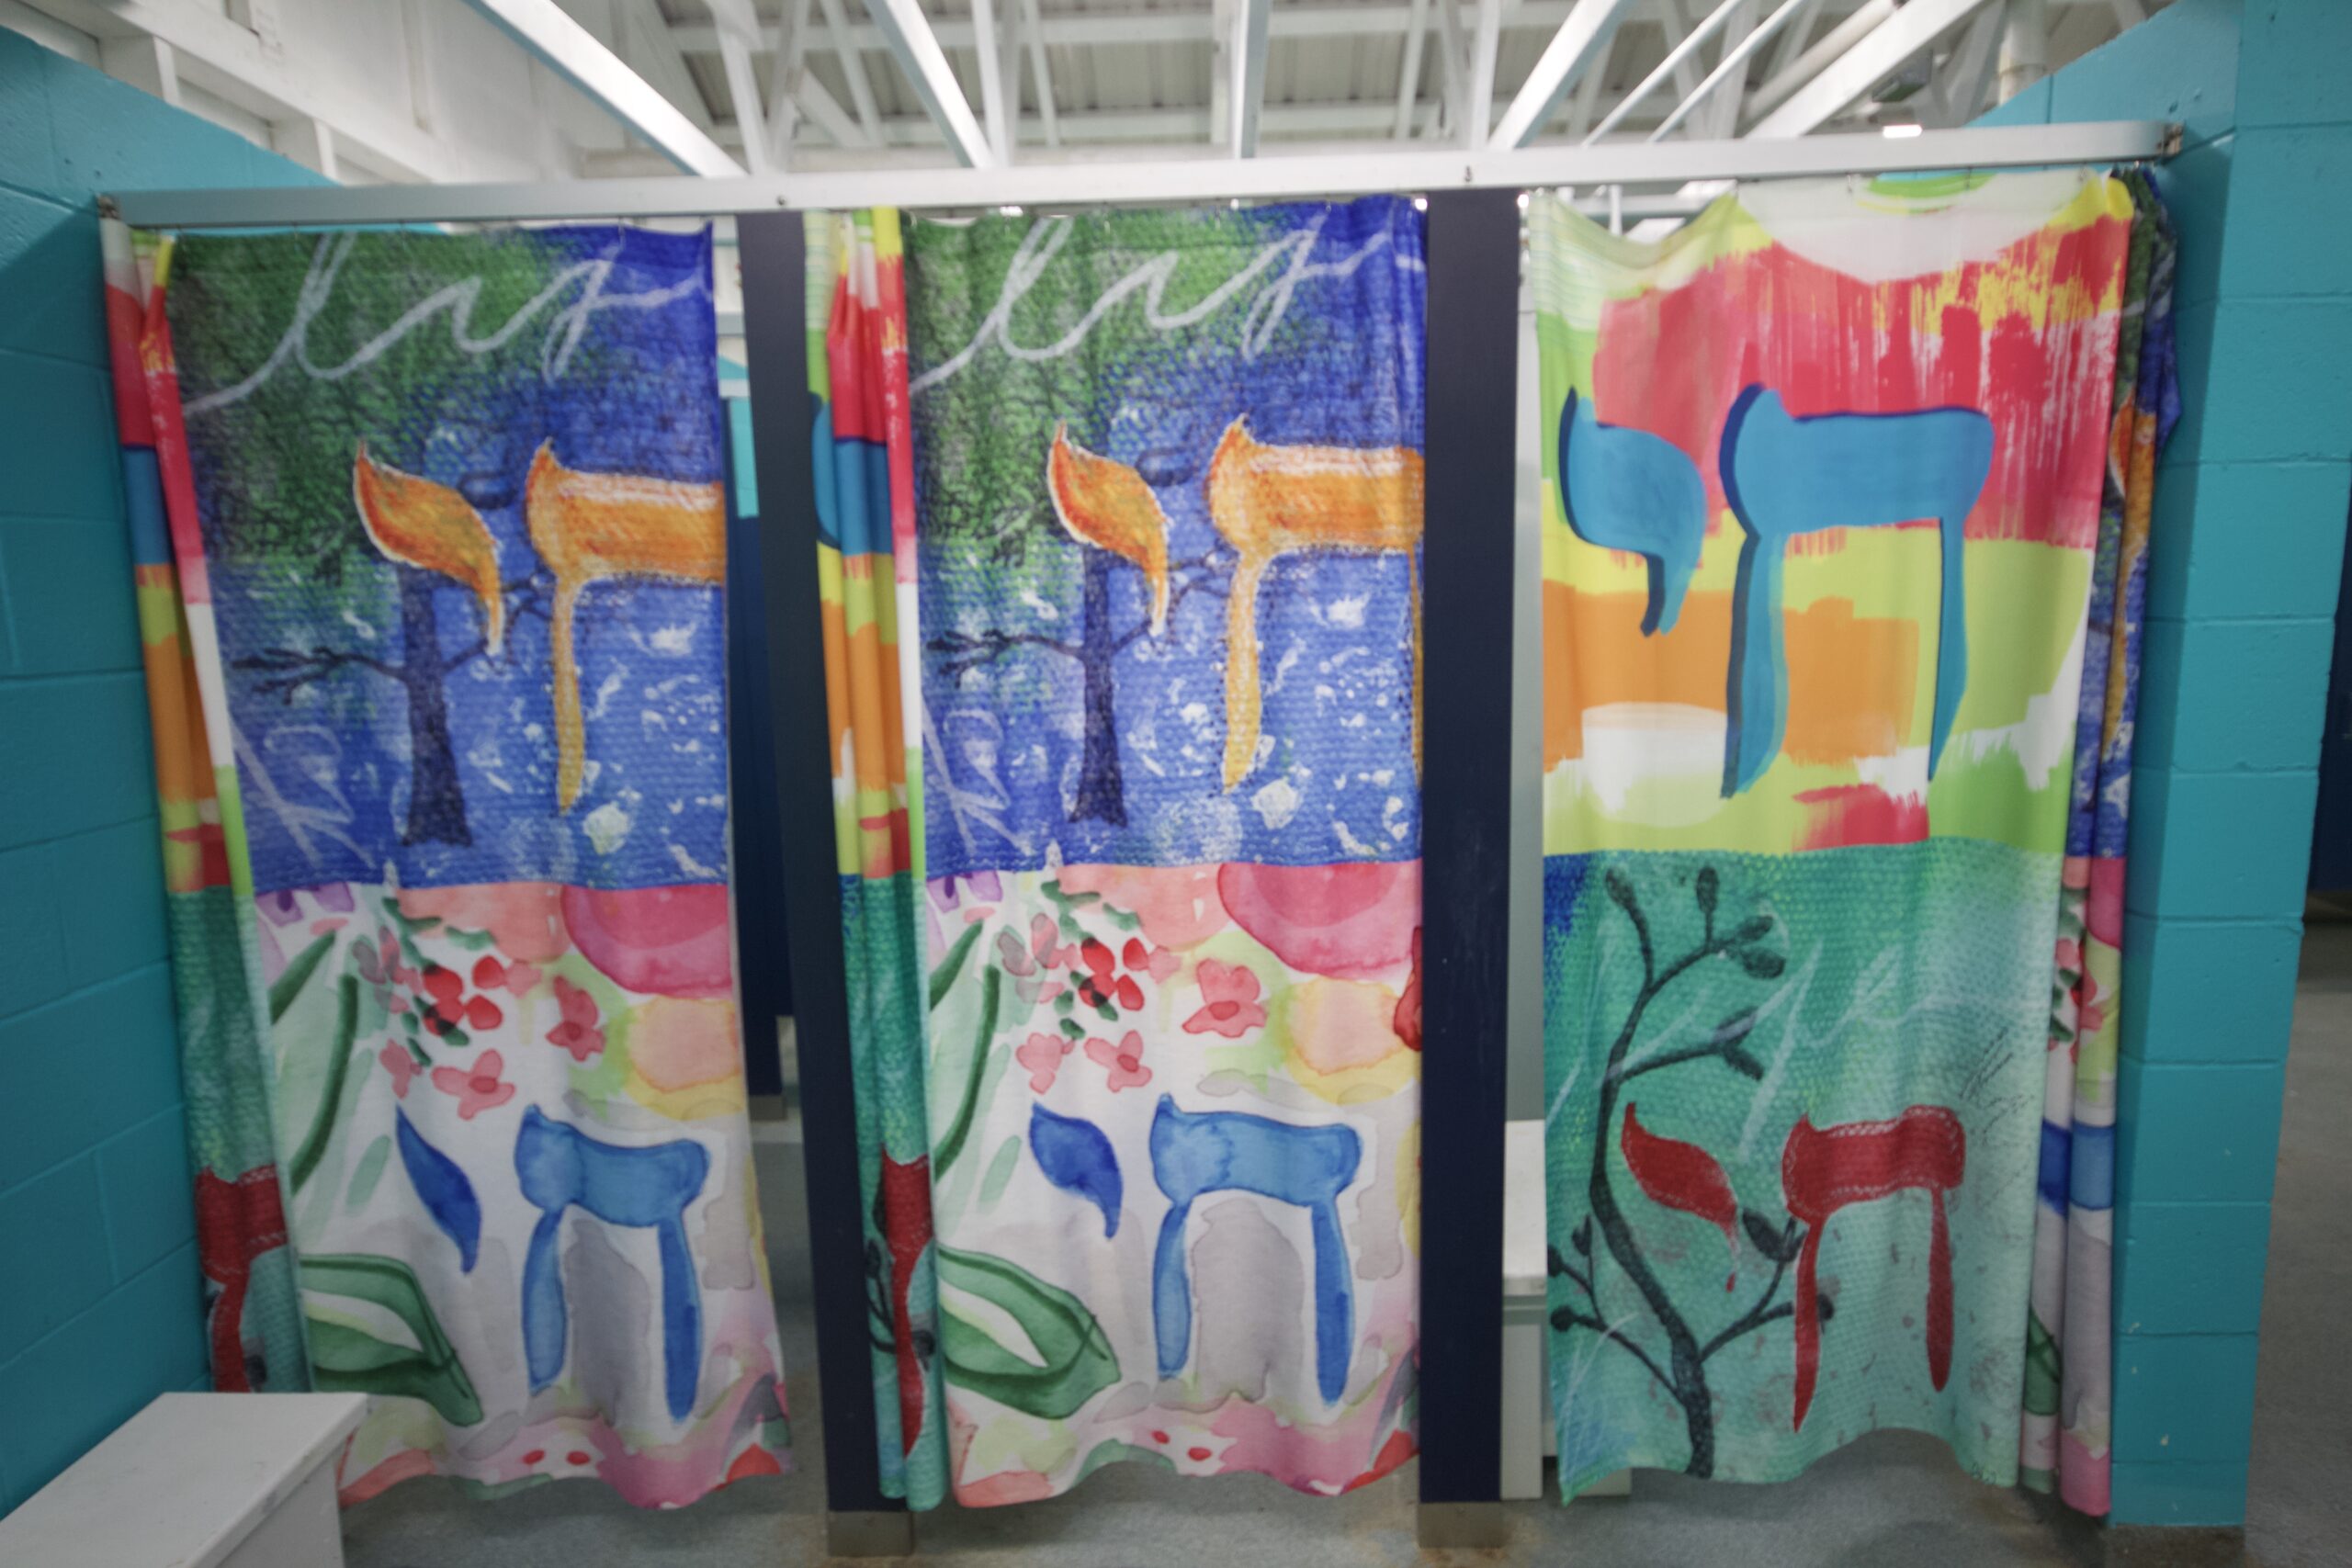 AFTER: COLORFUL JEWISH SHOWER CURTAINS CREATE PRIVACY